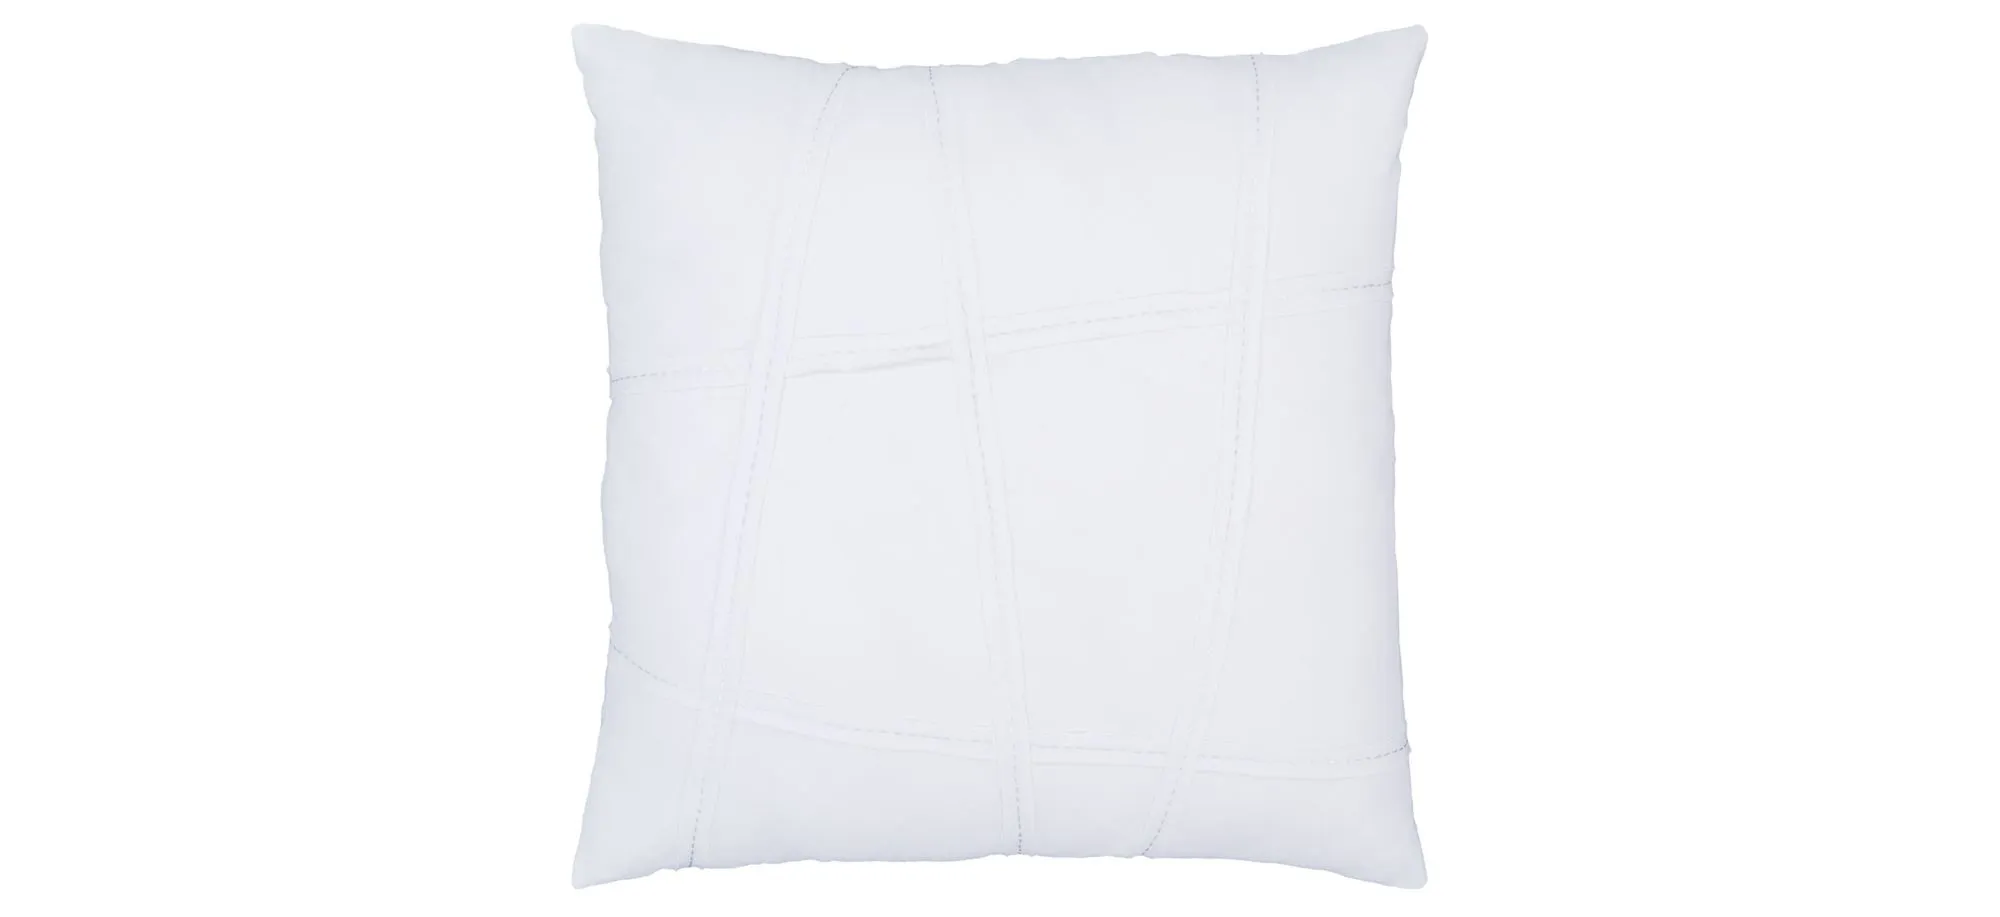 Haru Throw Pillow in White by Surya